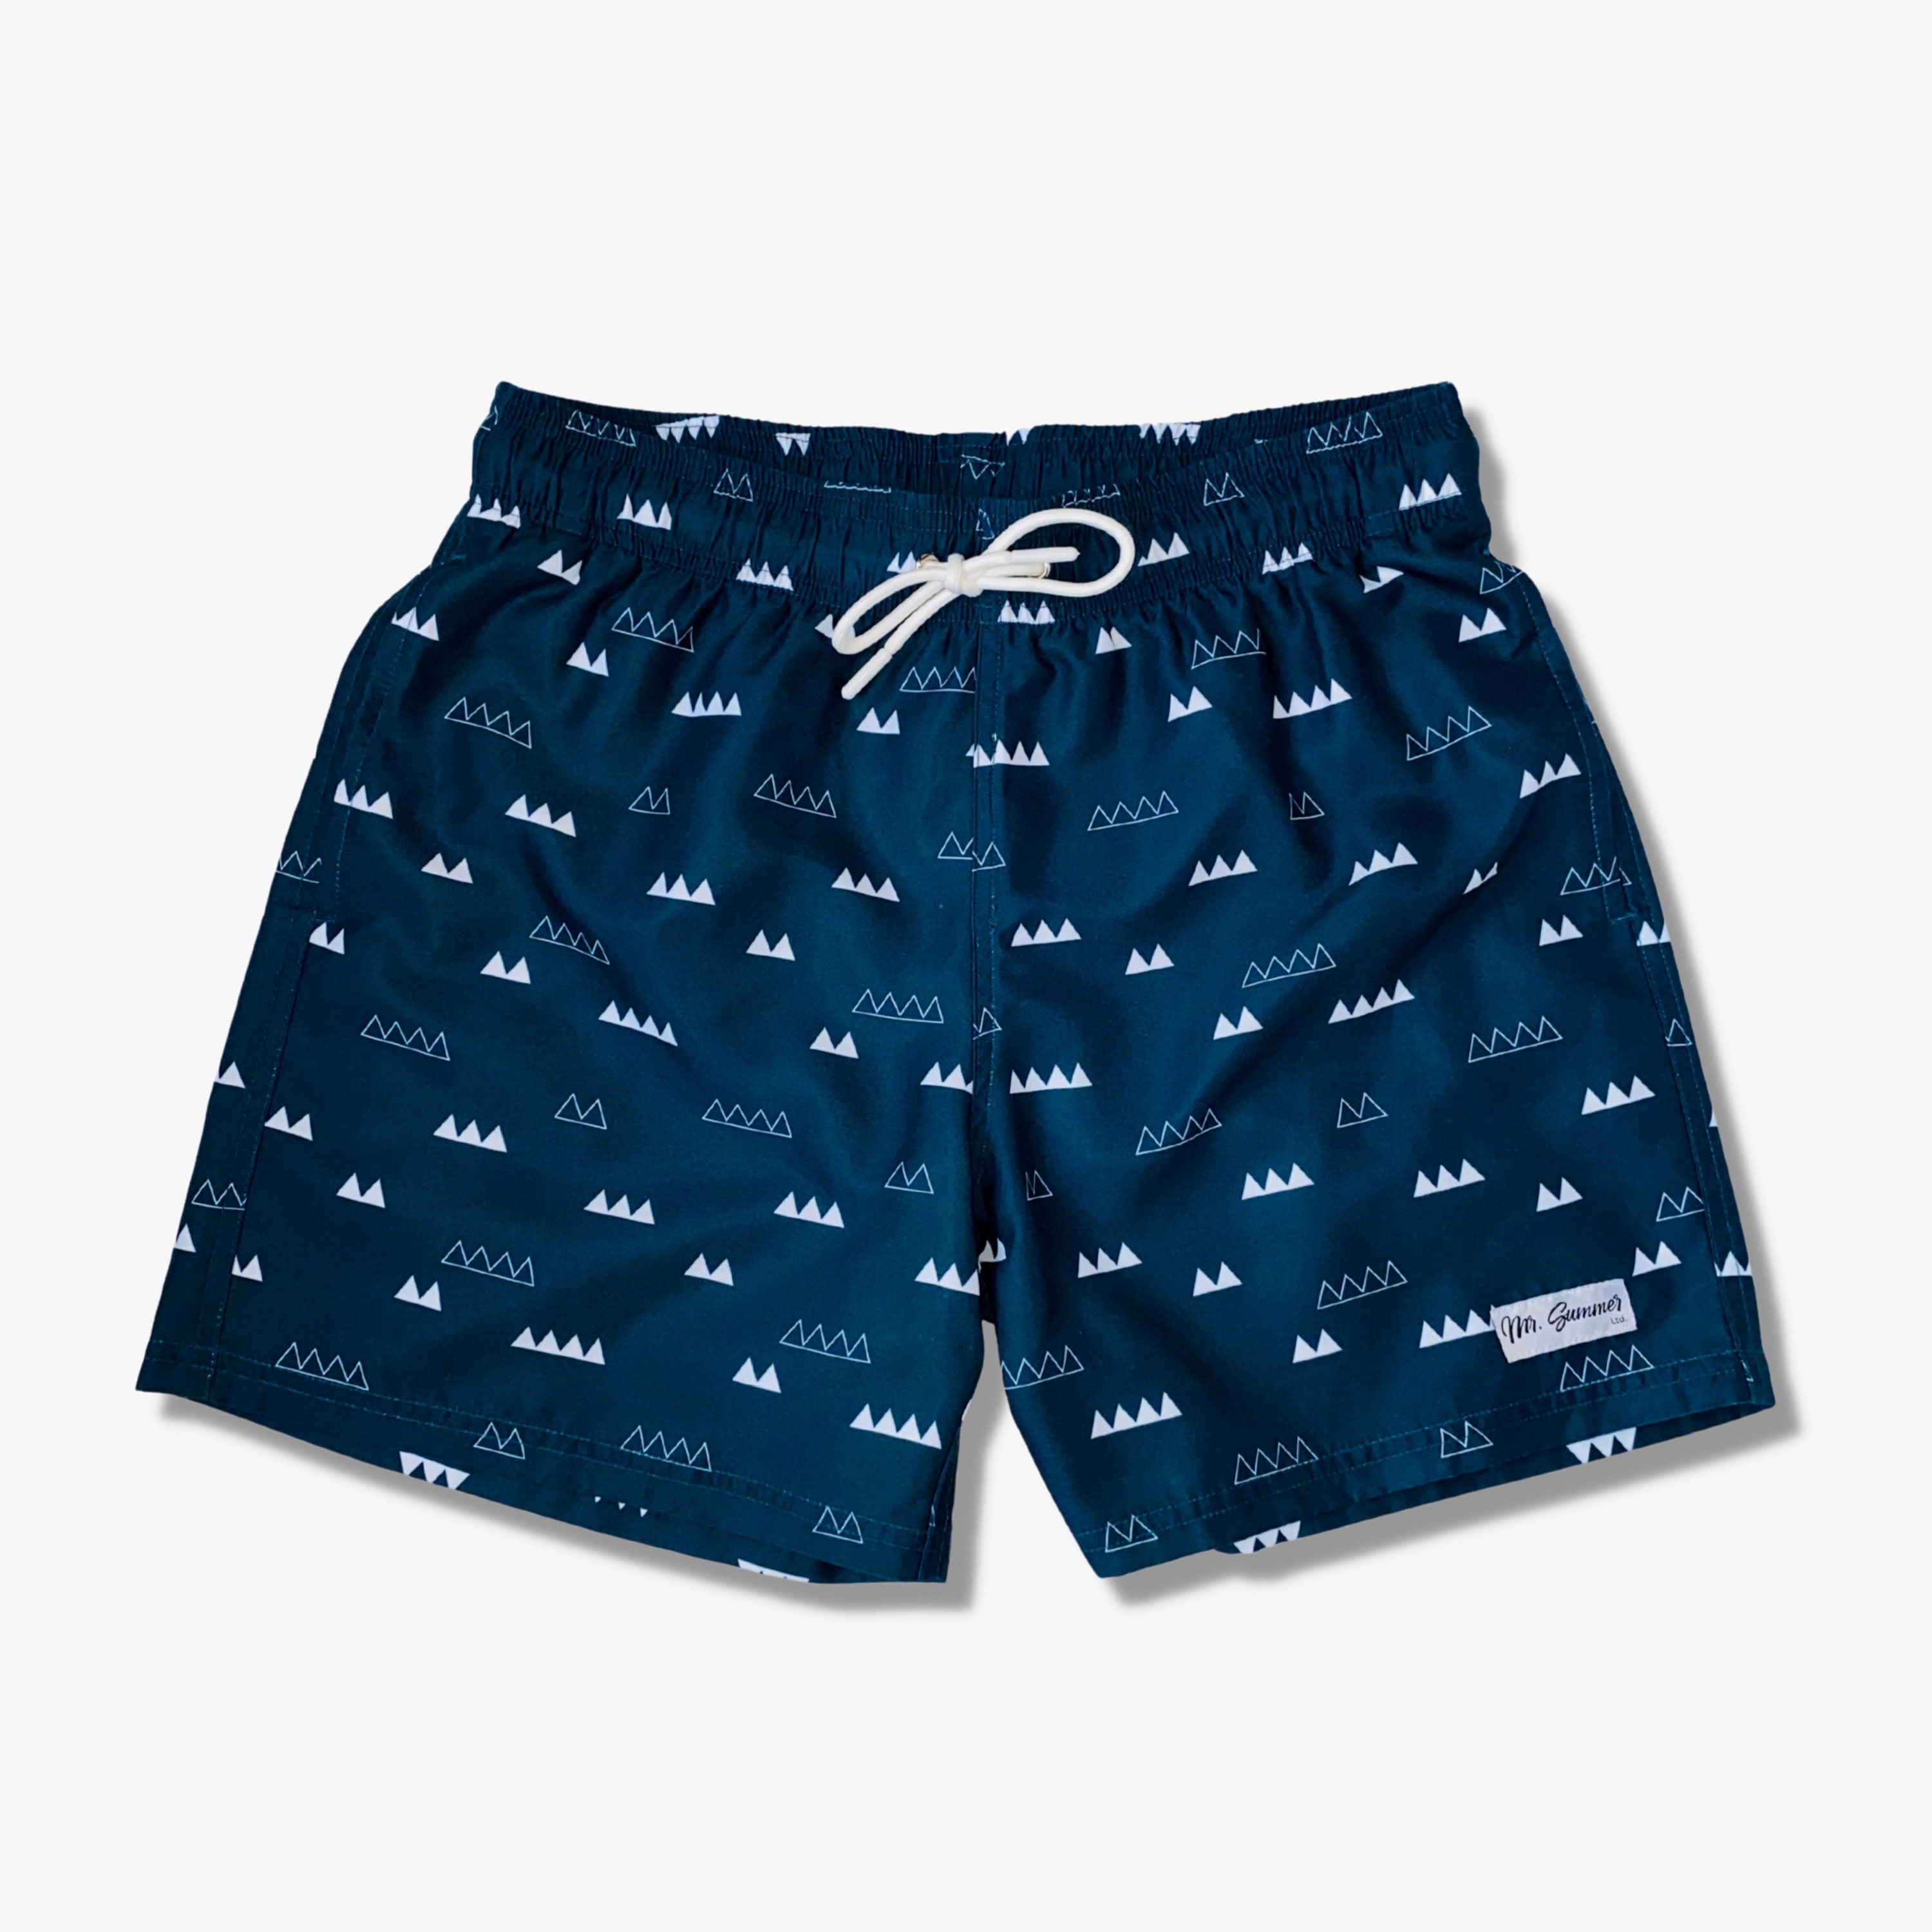 The Peaks and Valleys Swim Shorts